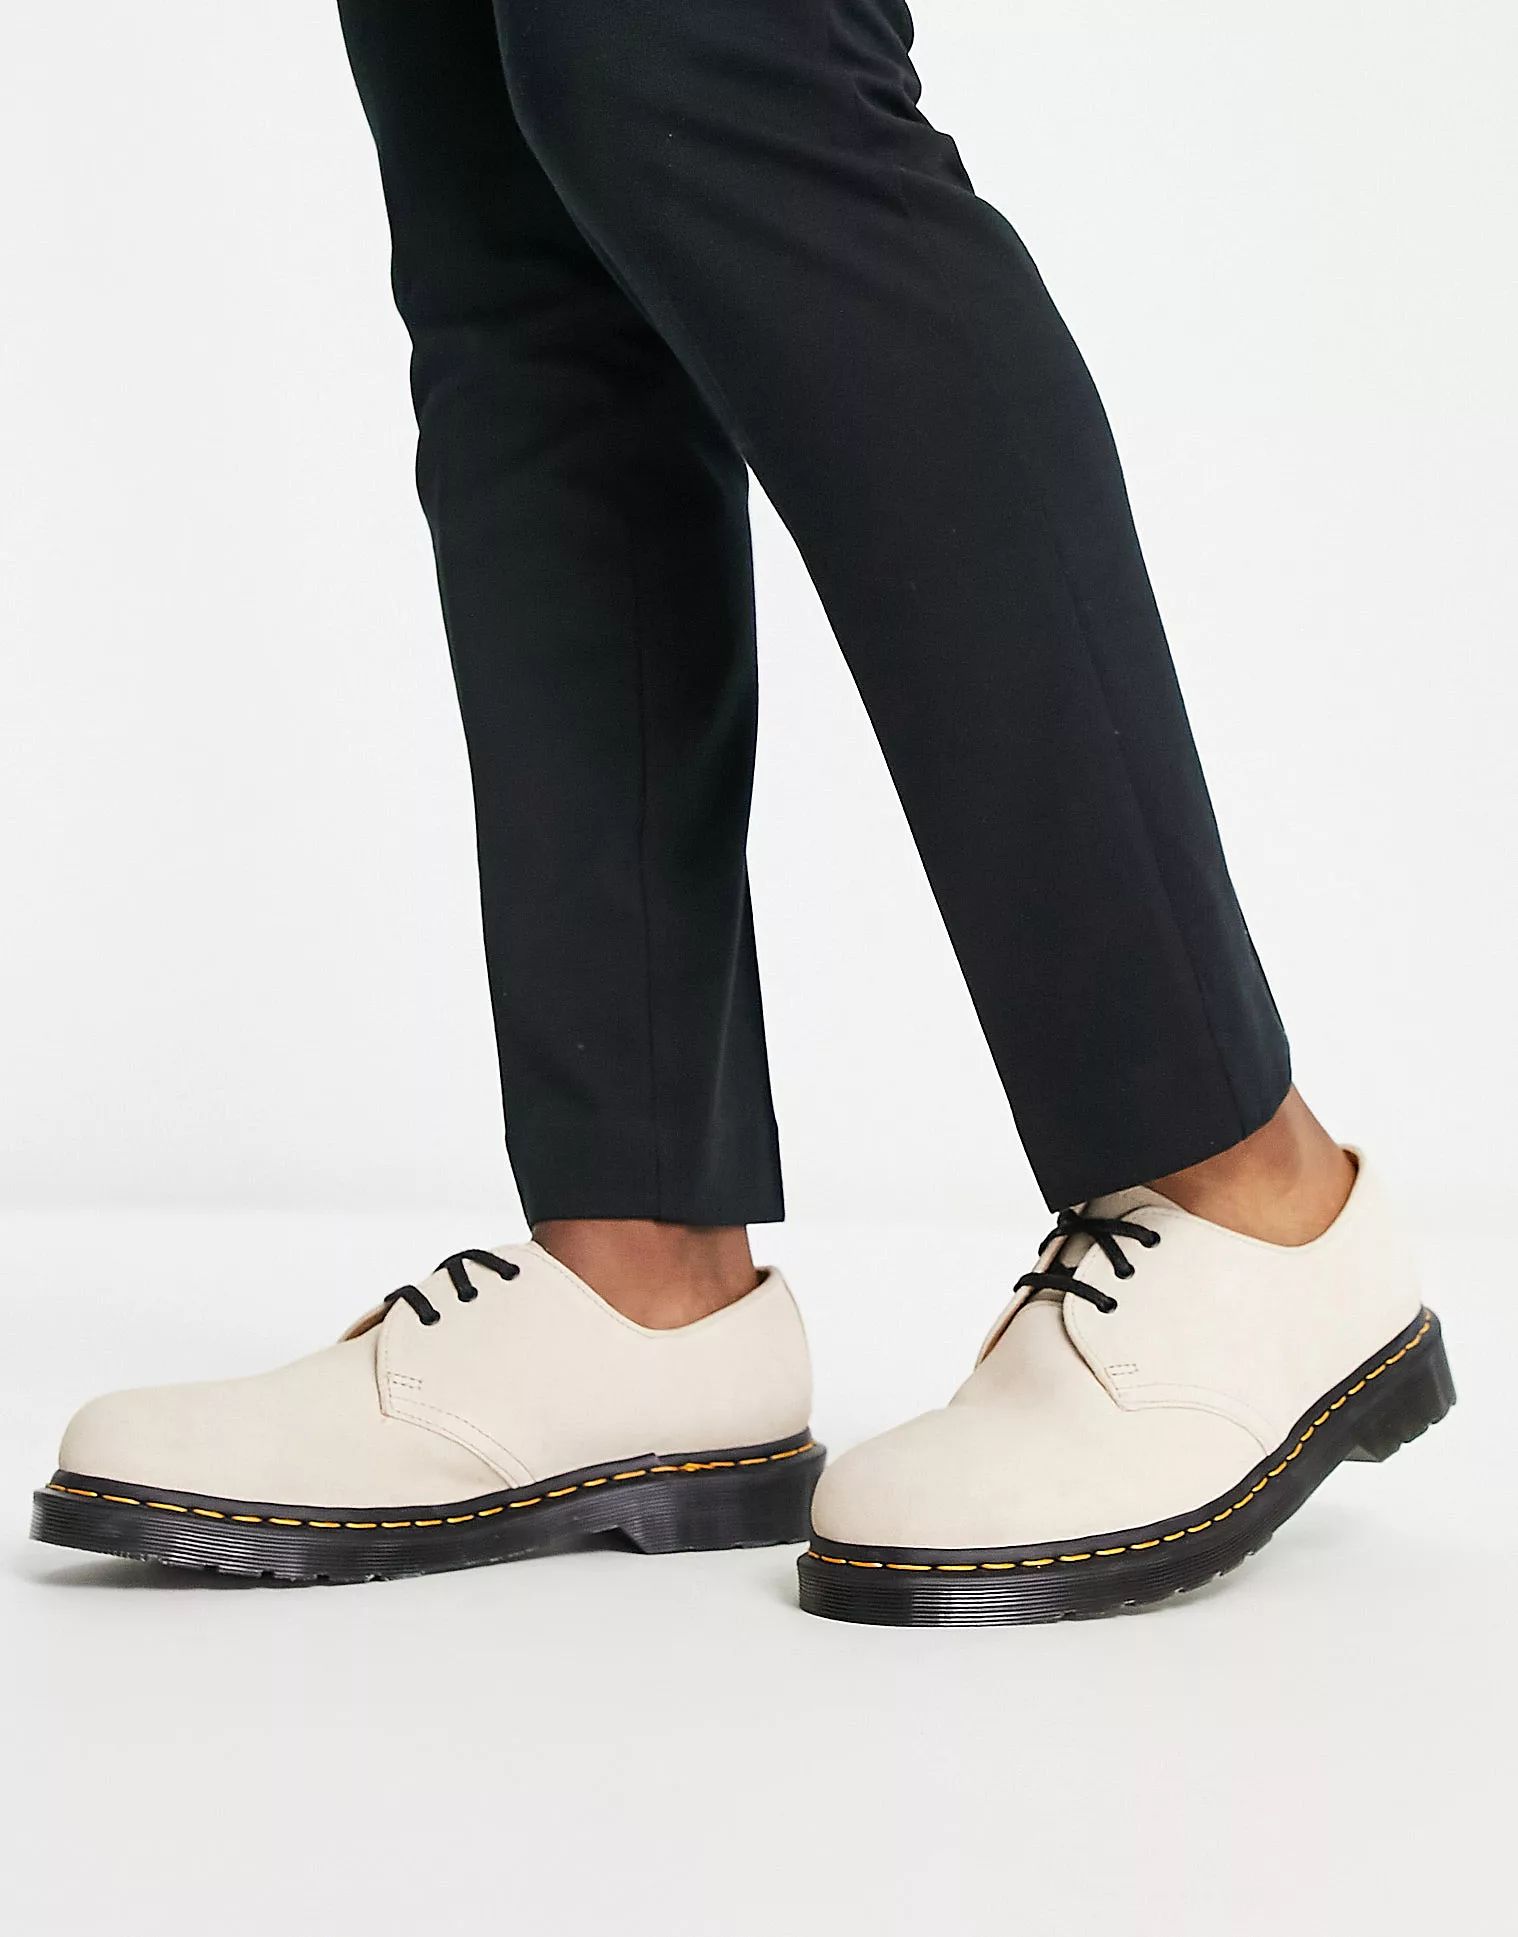 Dr Martens 1461 3 eye shoes in warm sand suede | ASOS (Global)